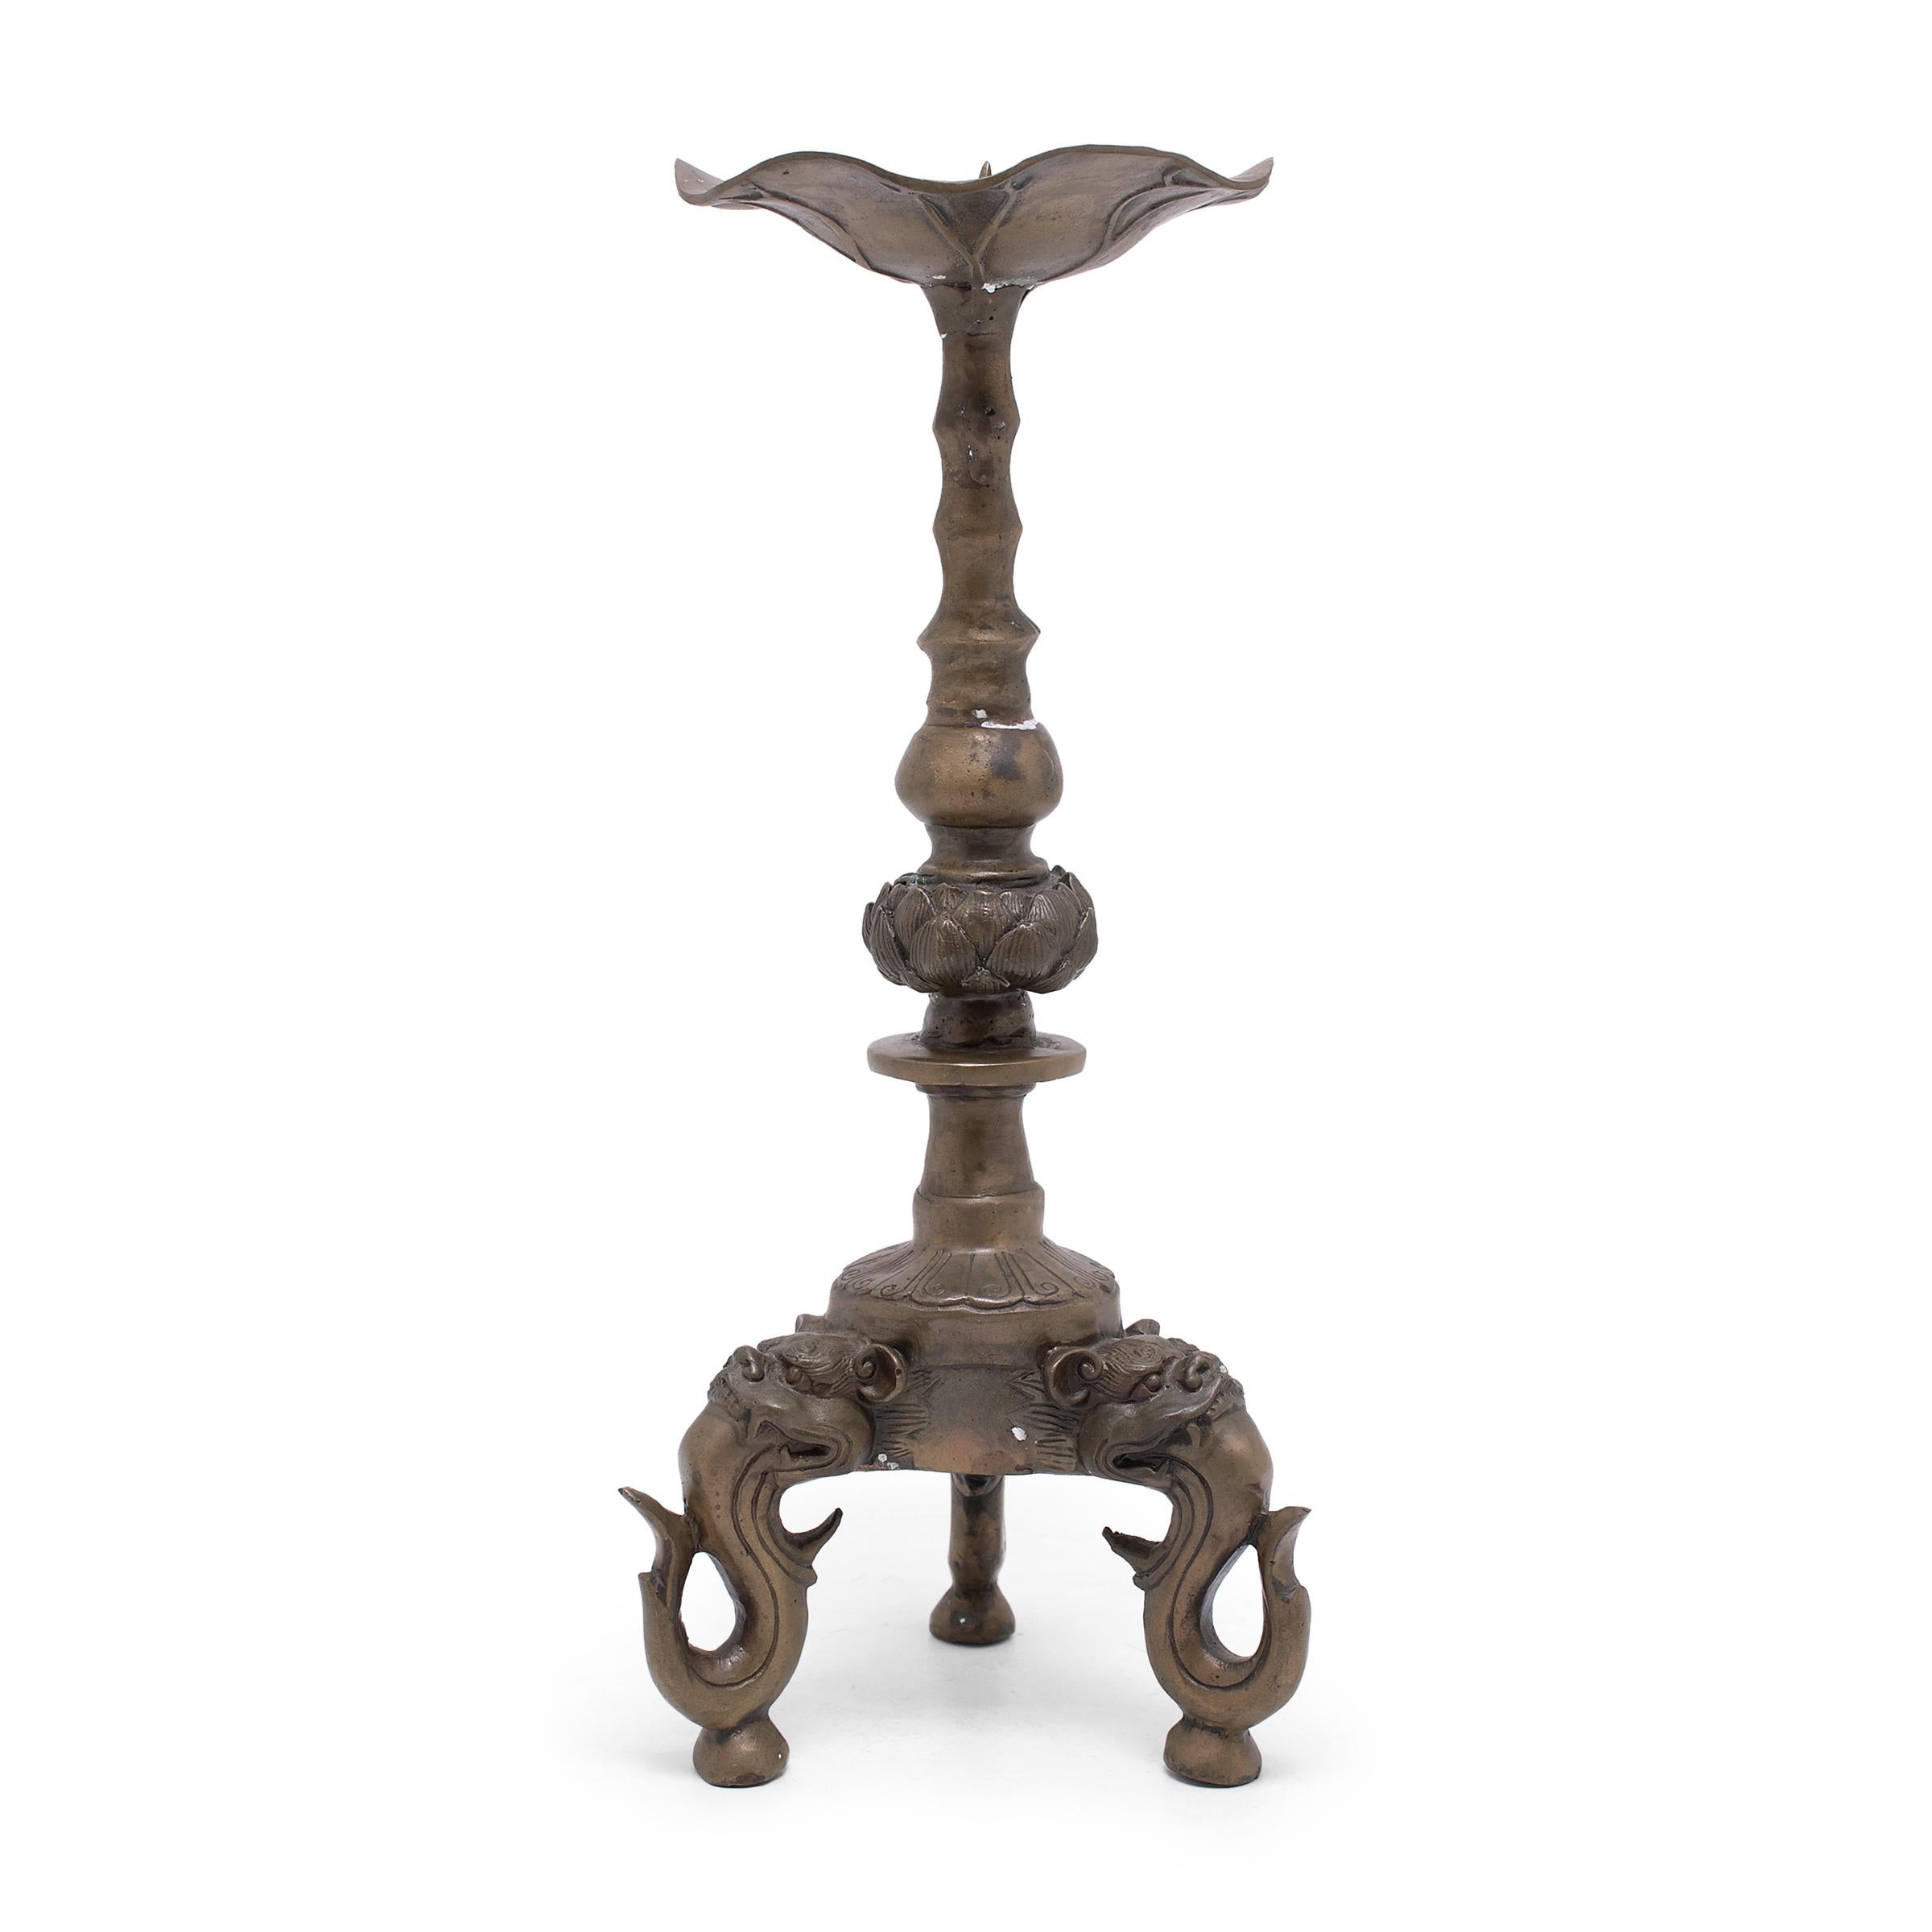 These brass candlesticks were cast with a fantastic sculptural form and are a beautiful example of Chinese metalwork. The scalloped candle dish is shaped like a delicate lotus leaf, floating above a lotus blossom shoulder and a tripod base. Each leg